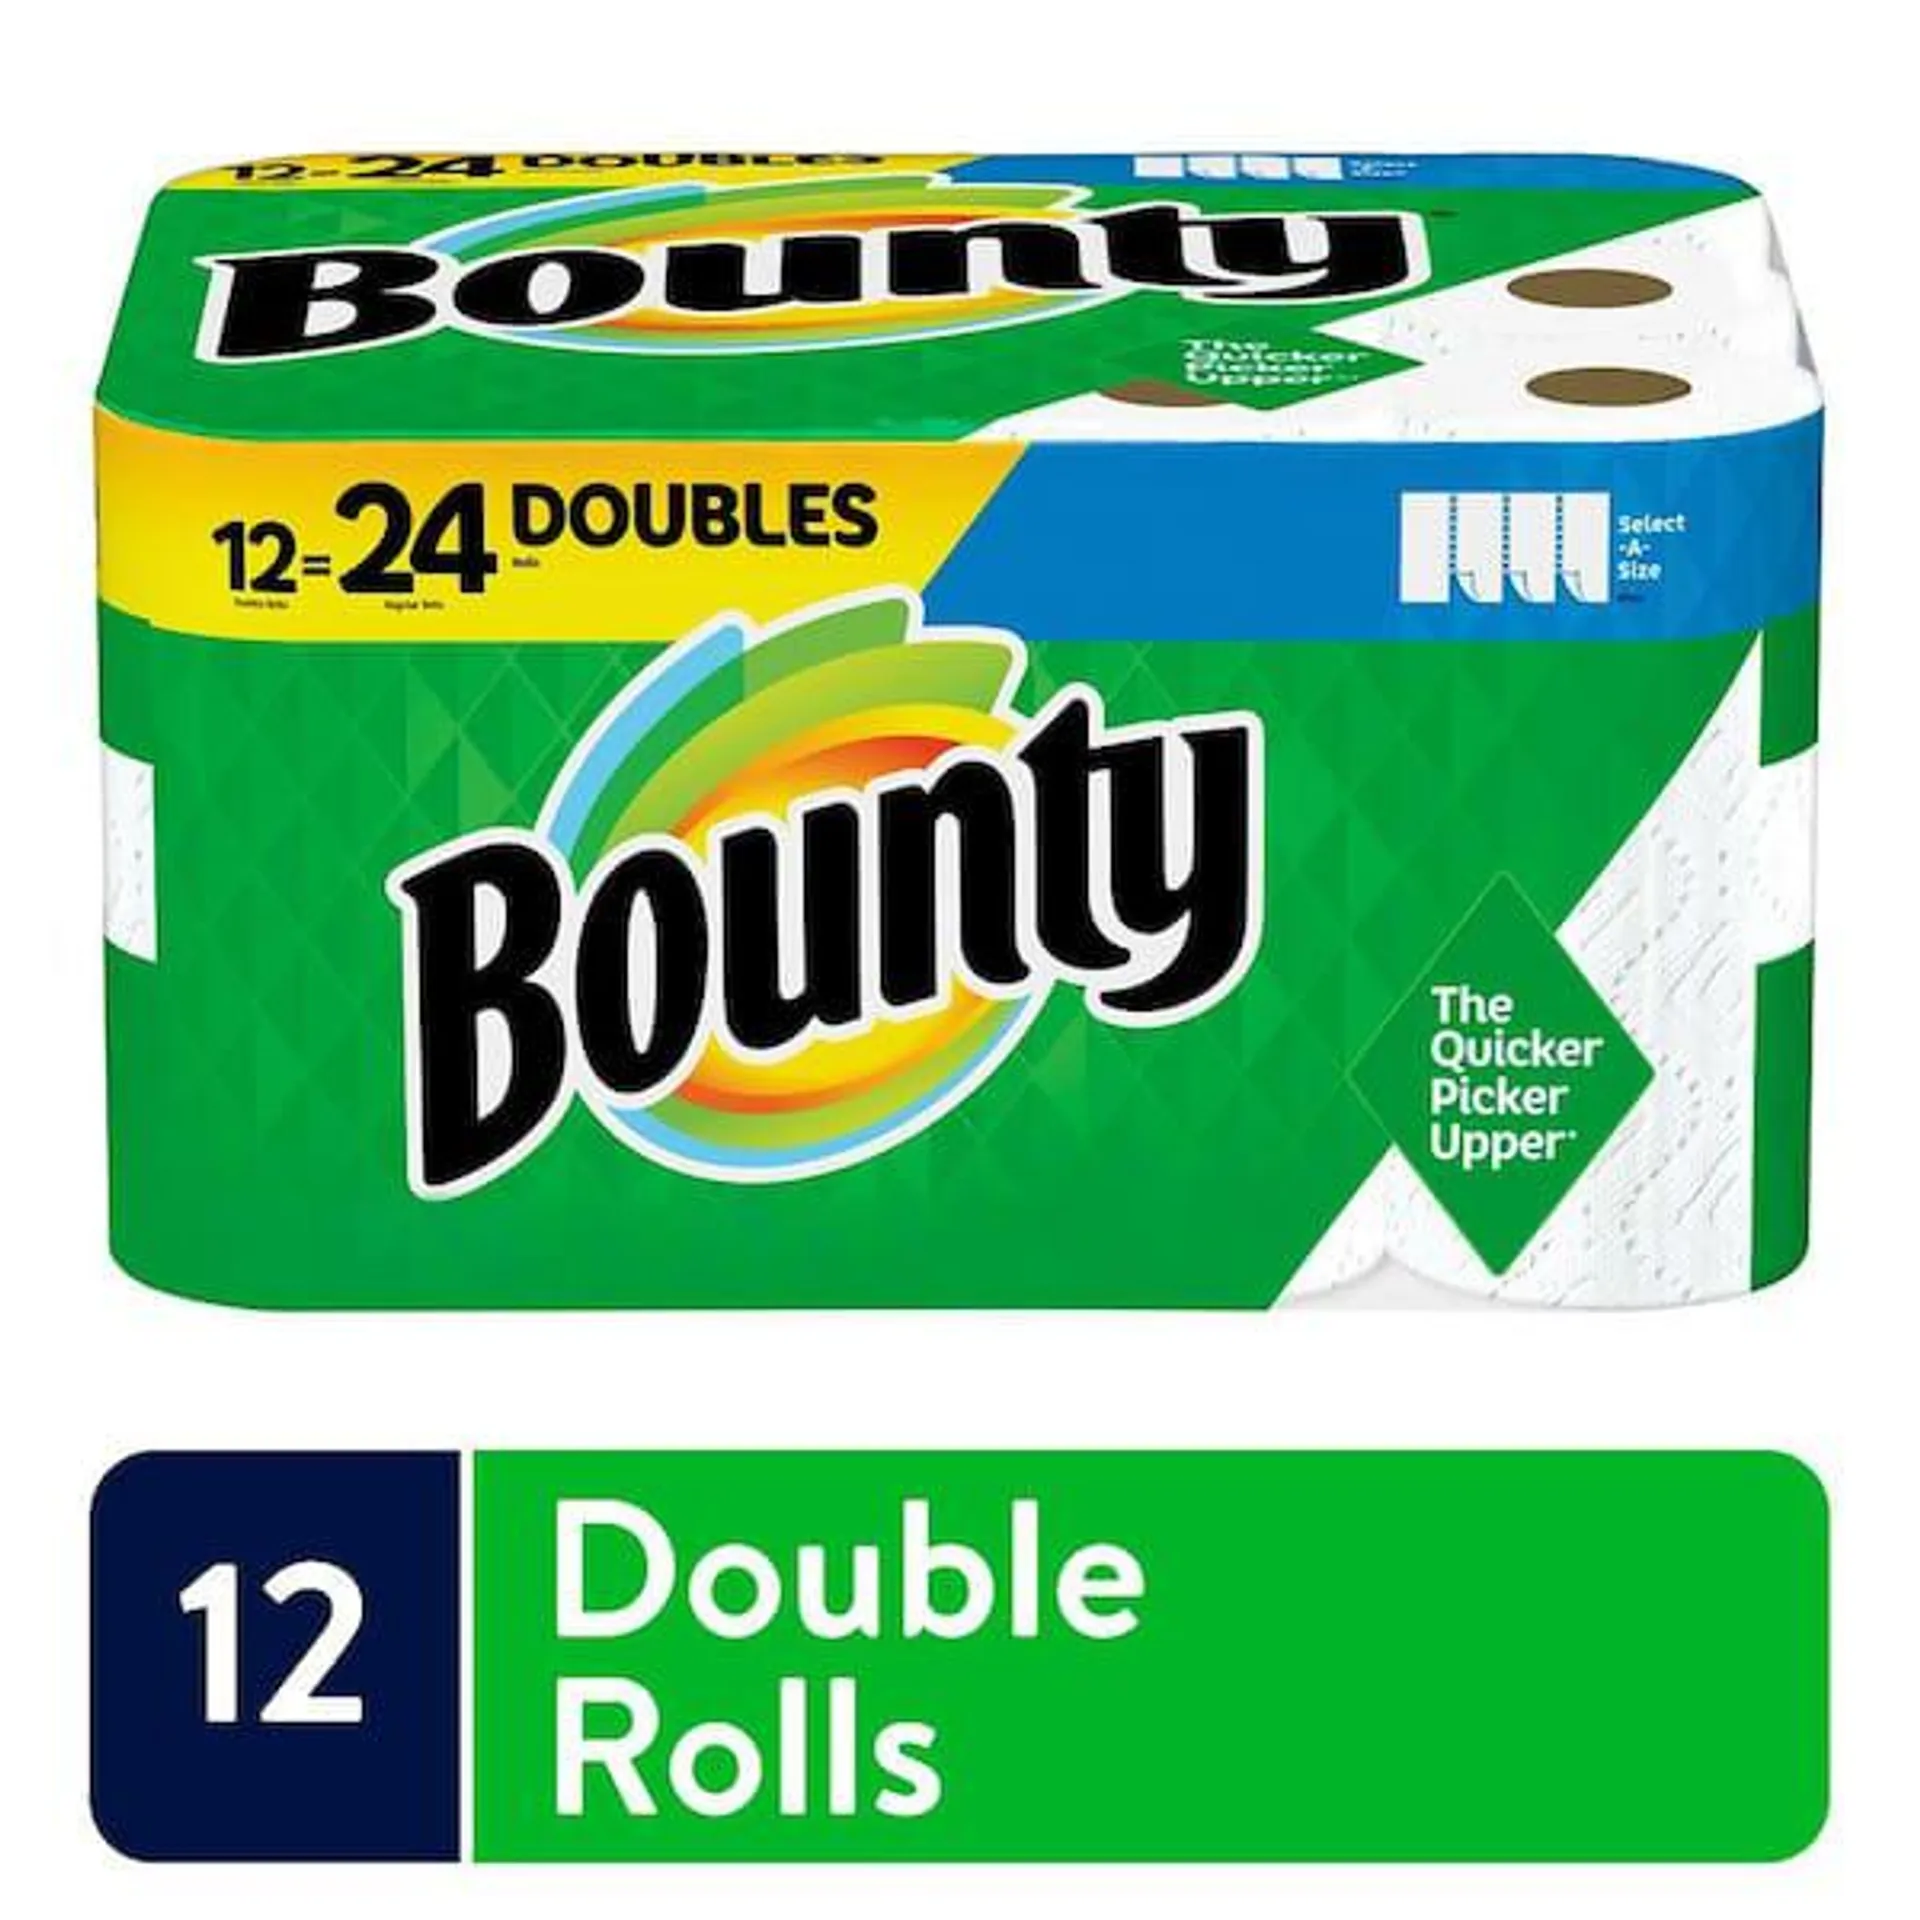 Select-A-Size White Paper Towels (12 Double Rolls)